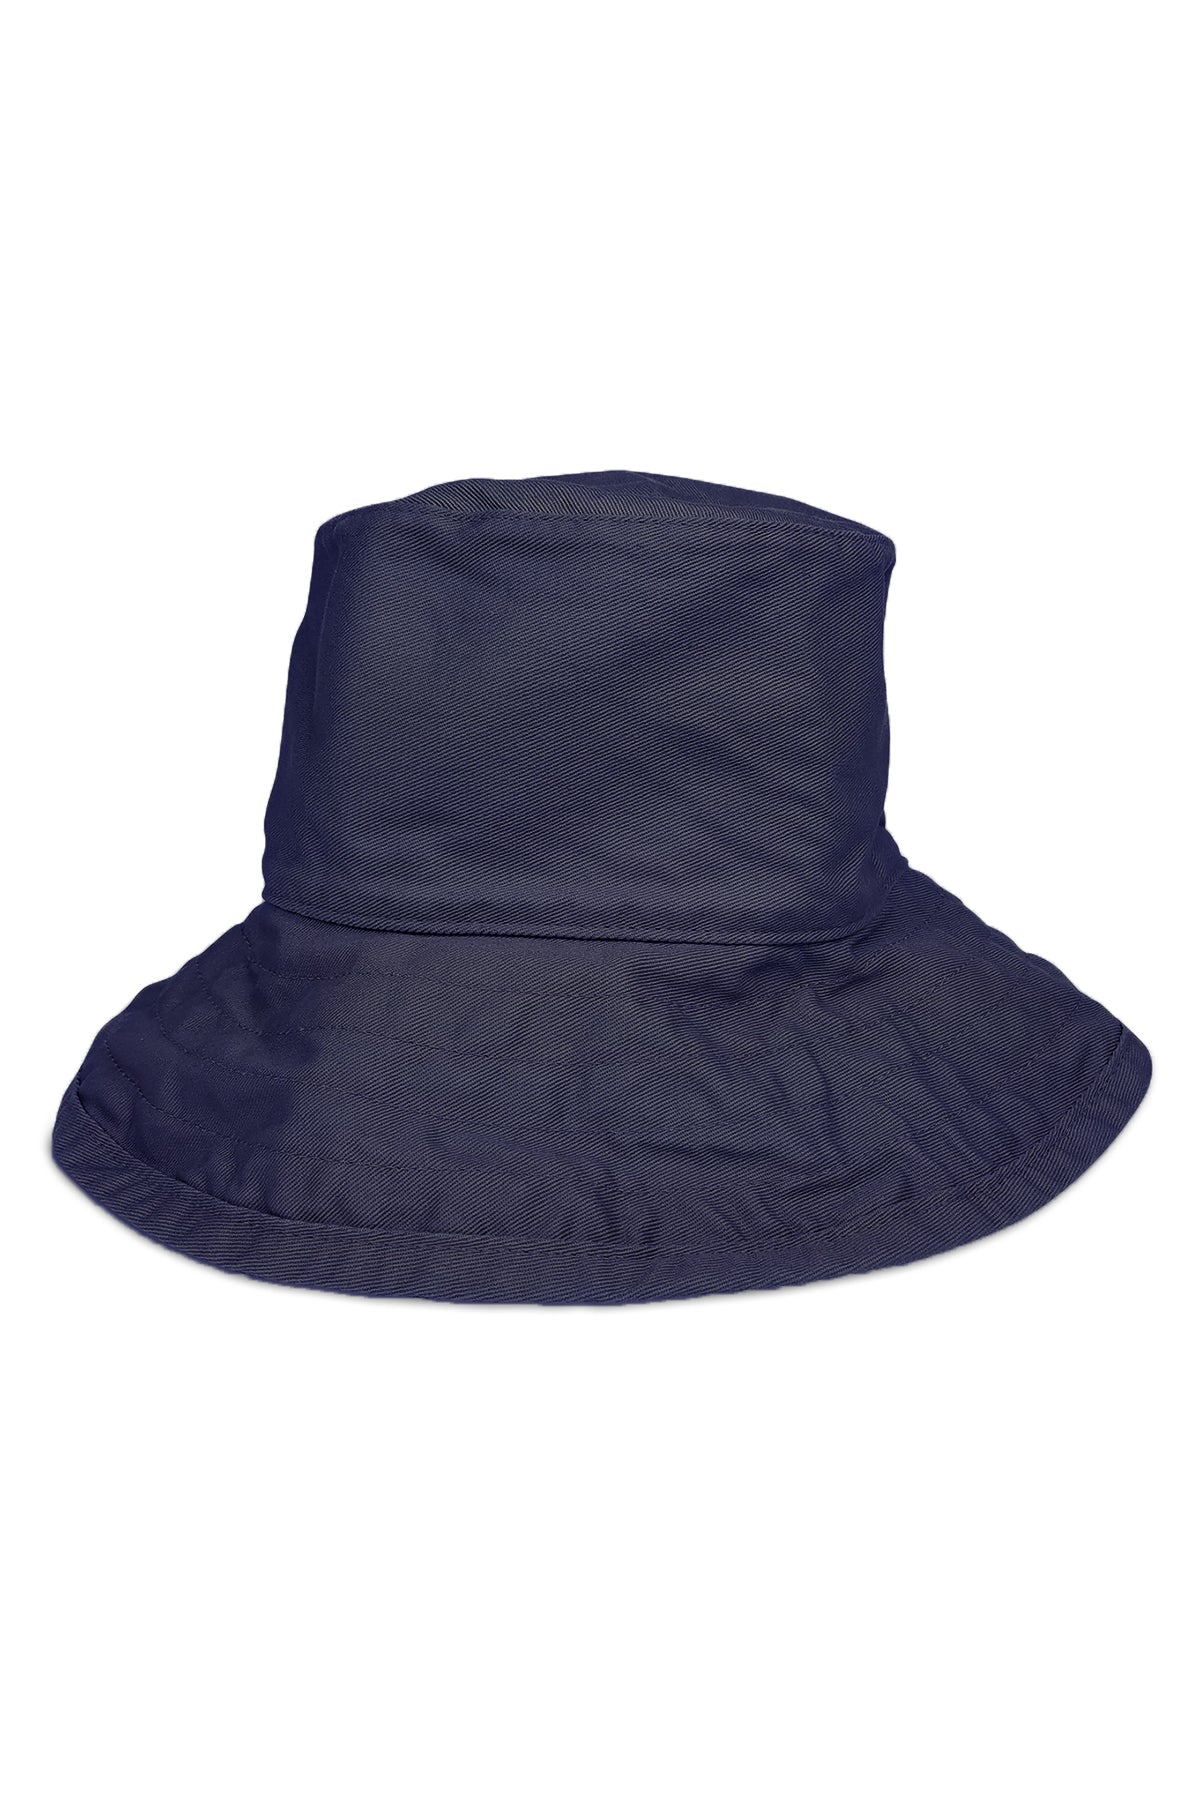 a Velvet by Graham & Spencer WASHED COTTON CRUSHER HAT on a white background.-26166718890177